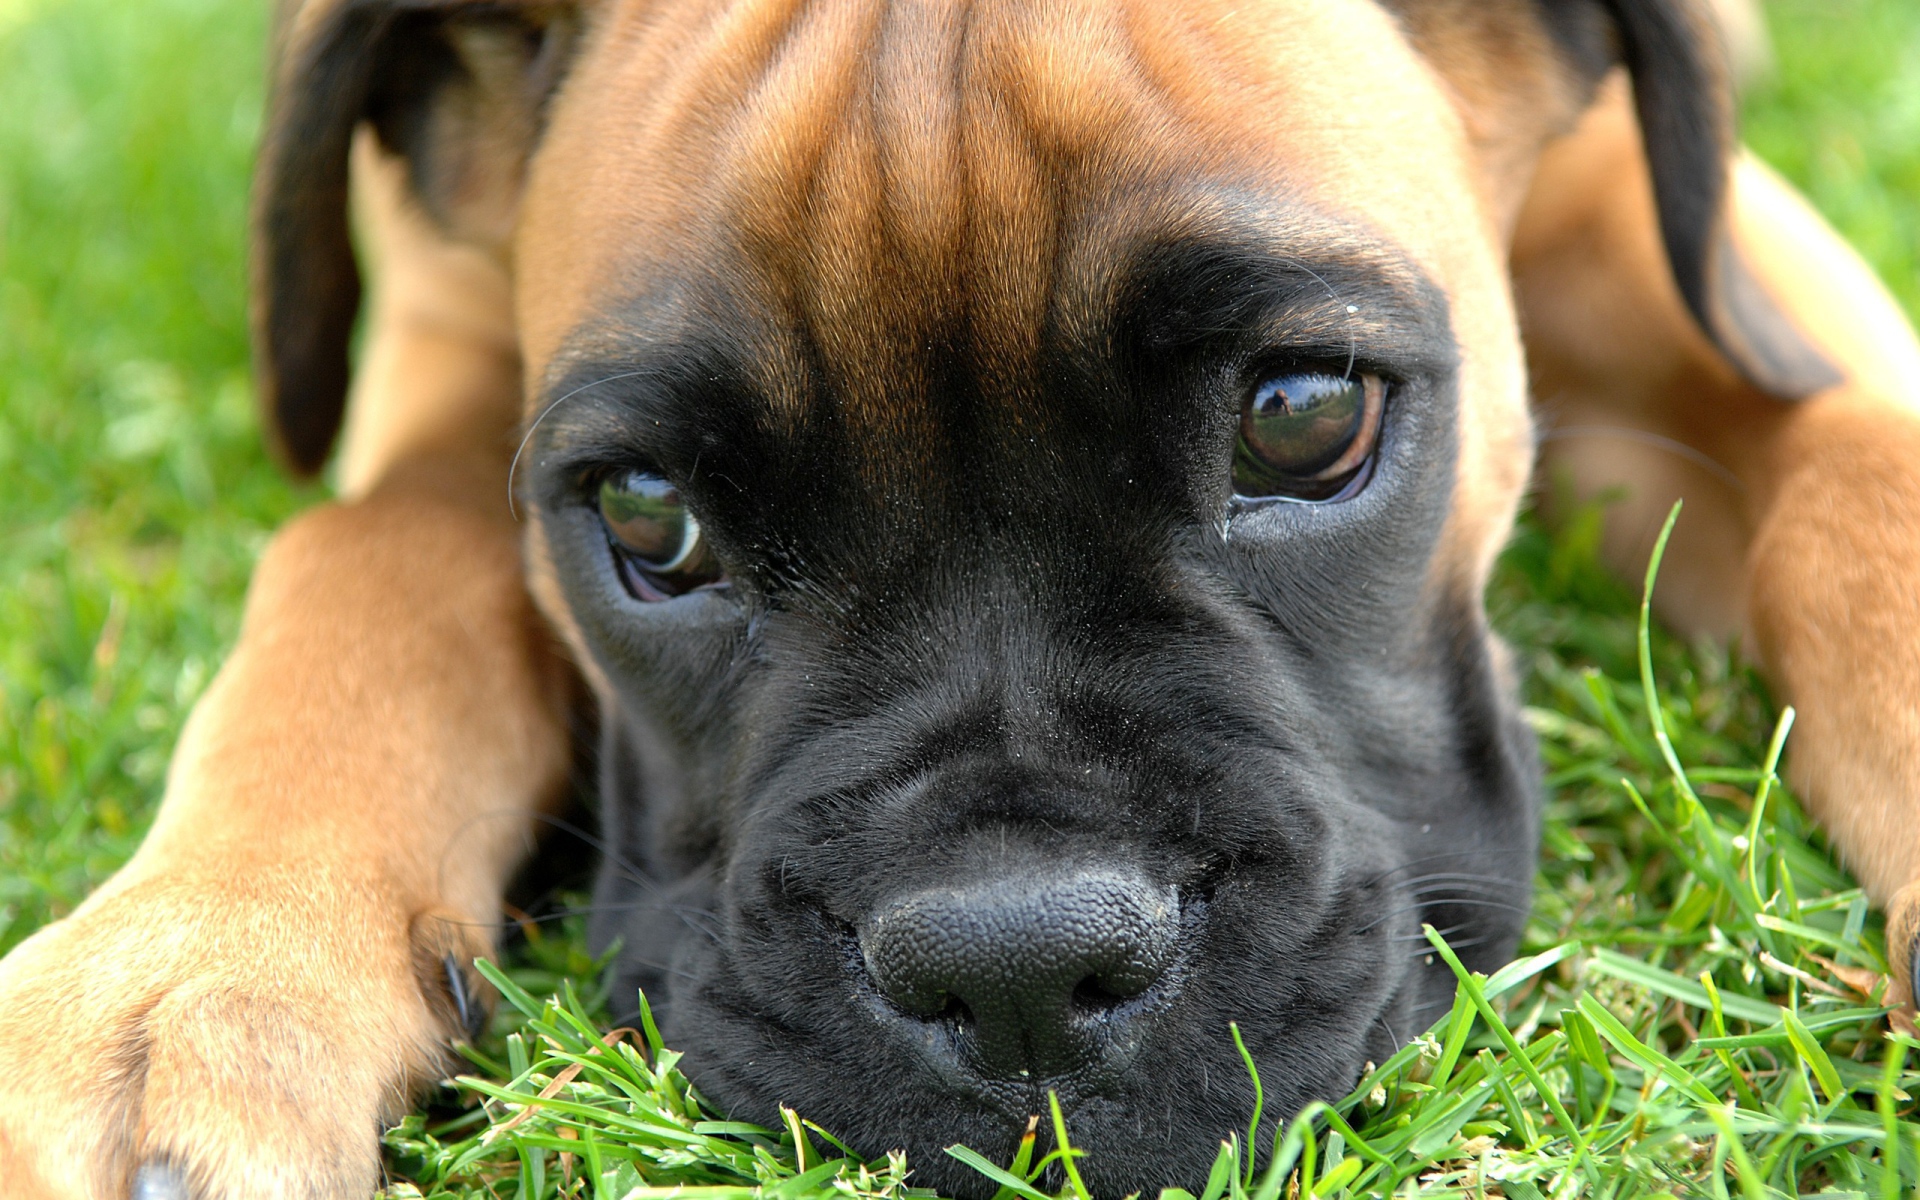  Boxer puppy thinking about something